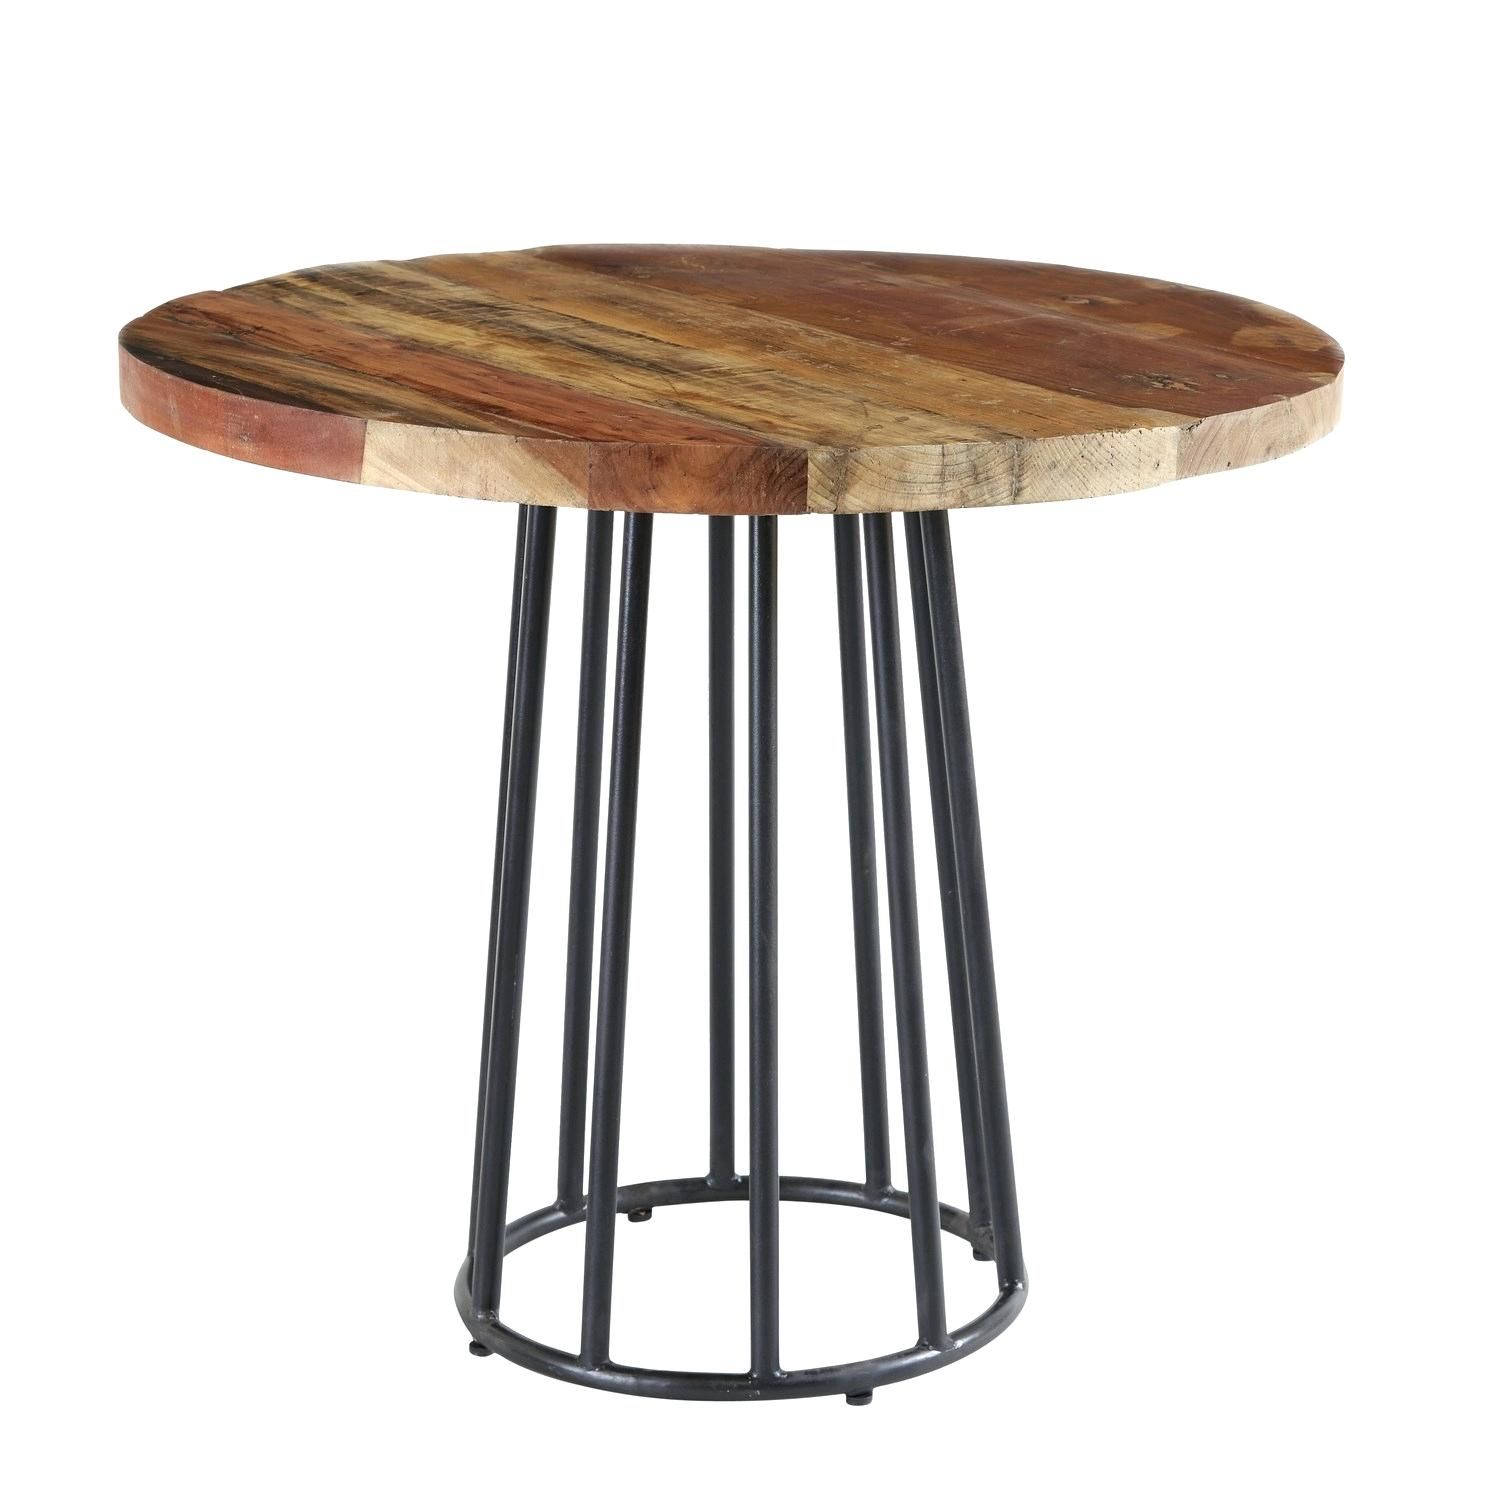 Salespots – Dining Table With Regard To Most Current Tuscan Chestnut Toscana Pedestal Extending Dining Tables (View 22 of 25)